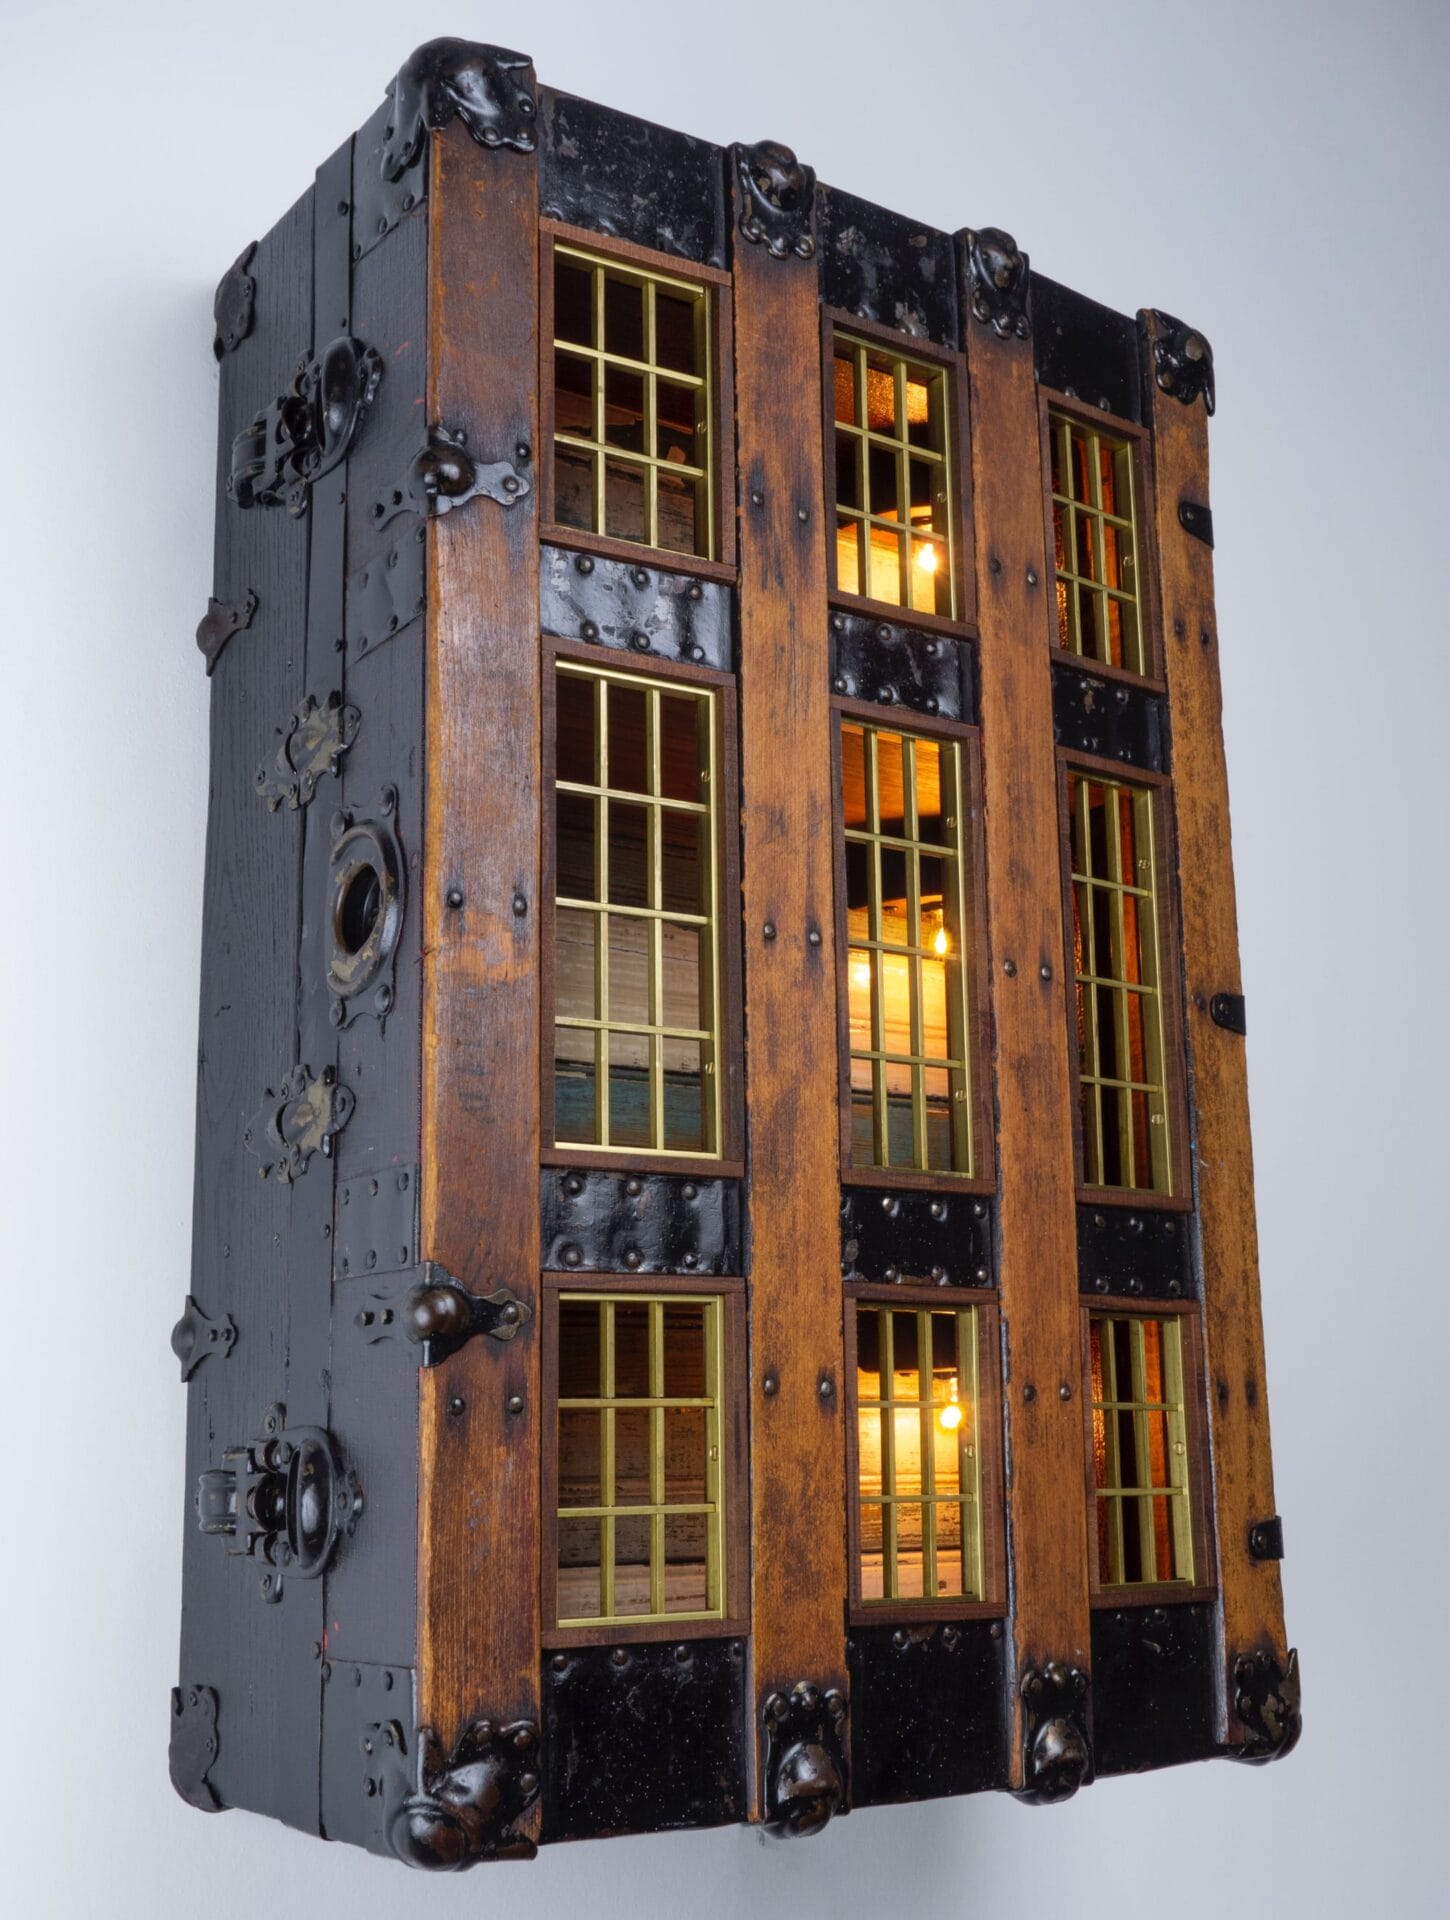 a wooden trunk standing upright with wooden windows carved from the top and lights inside